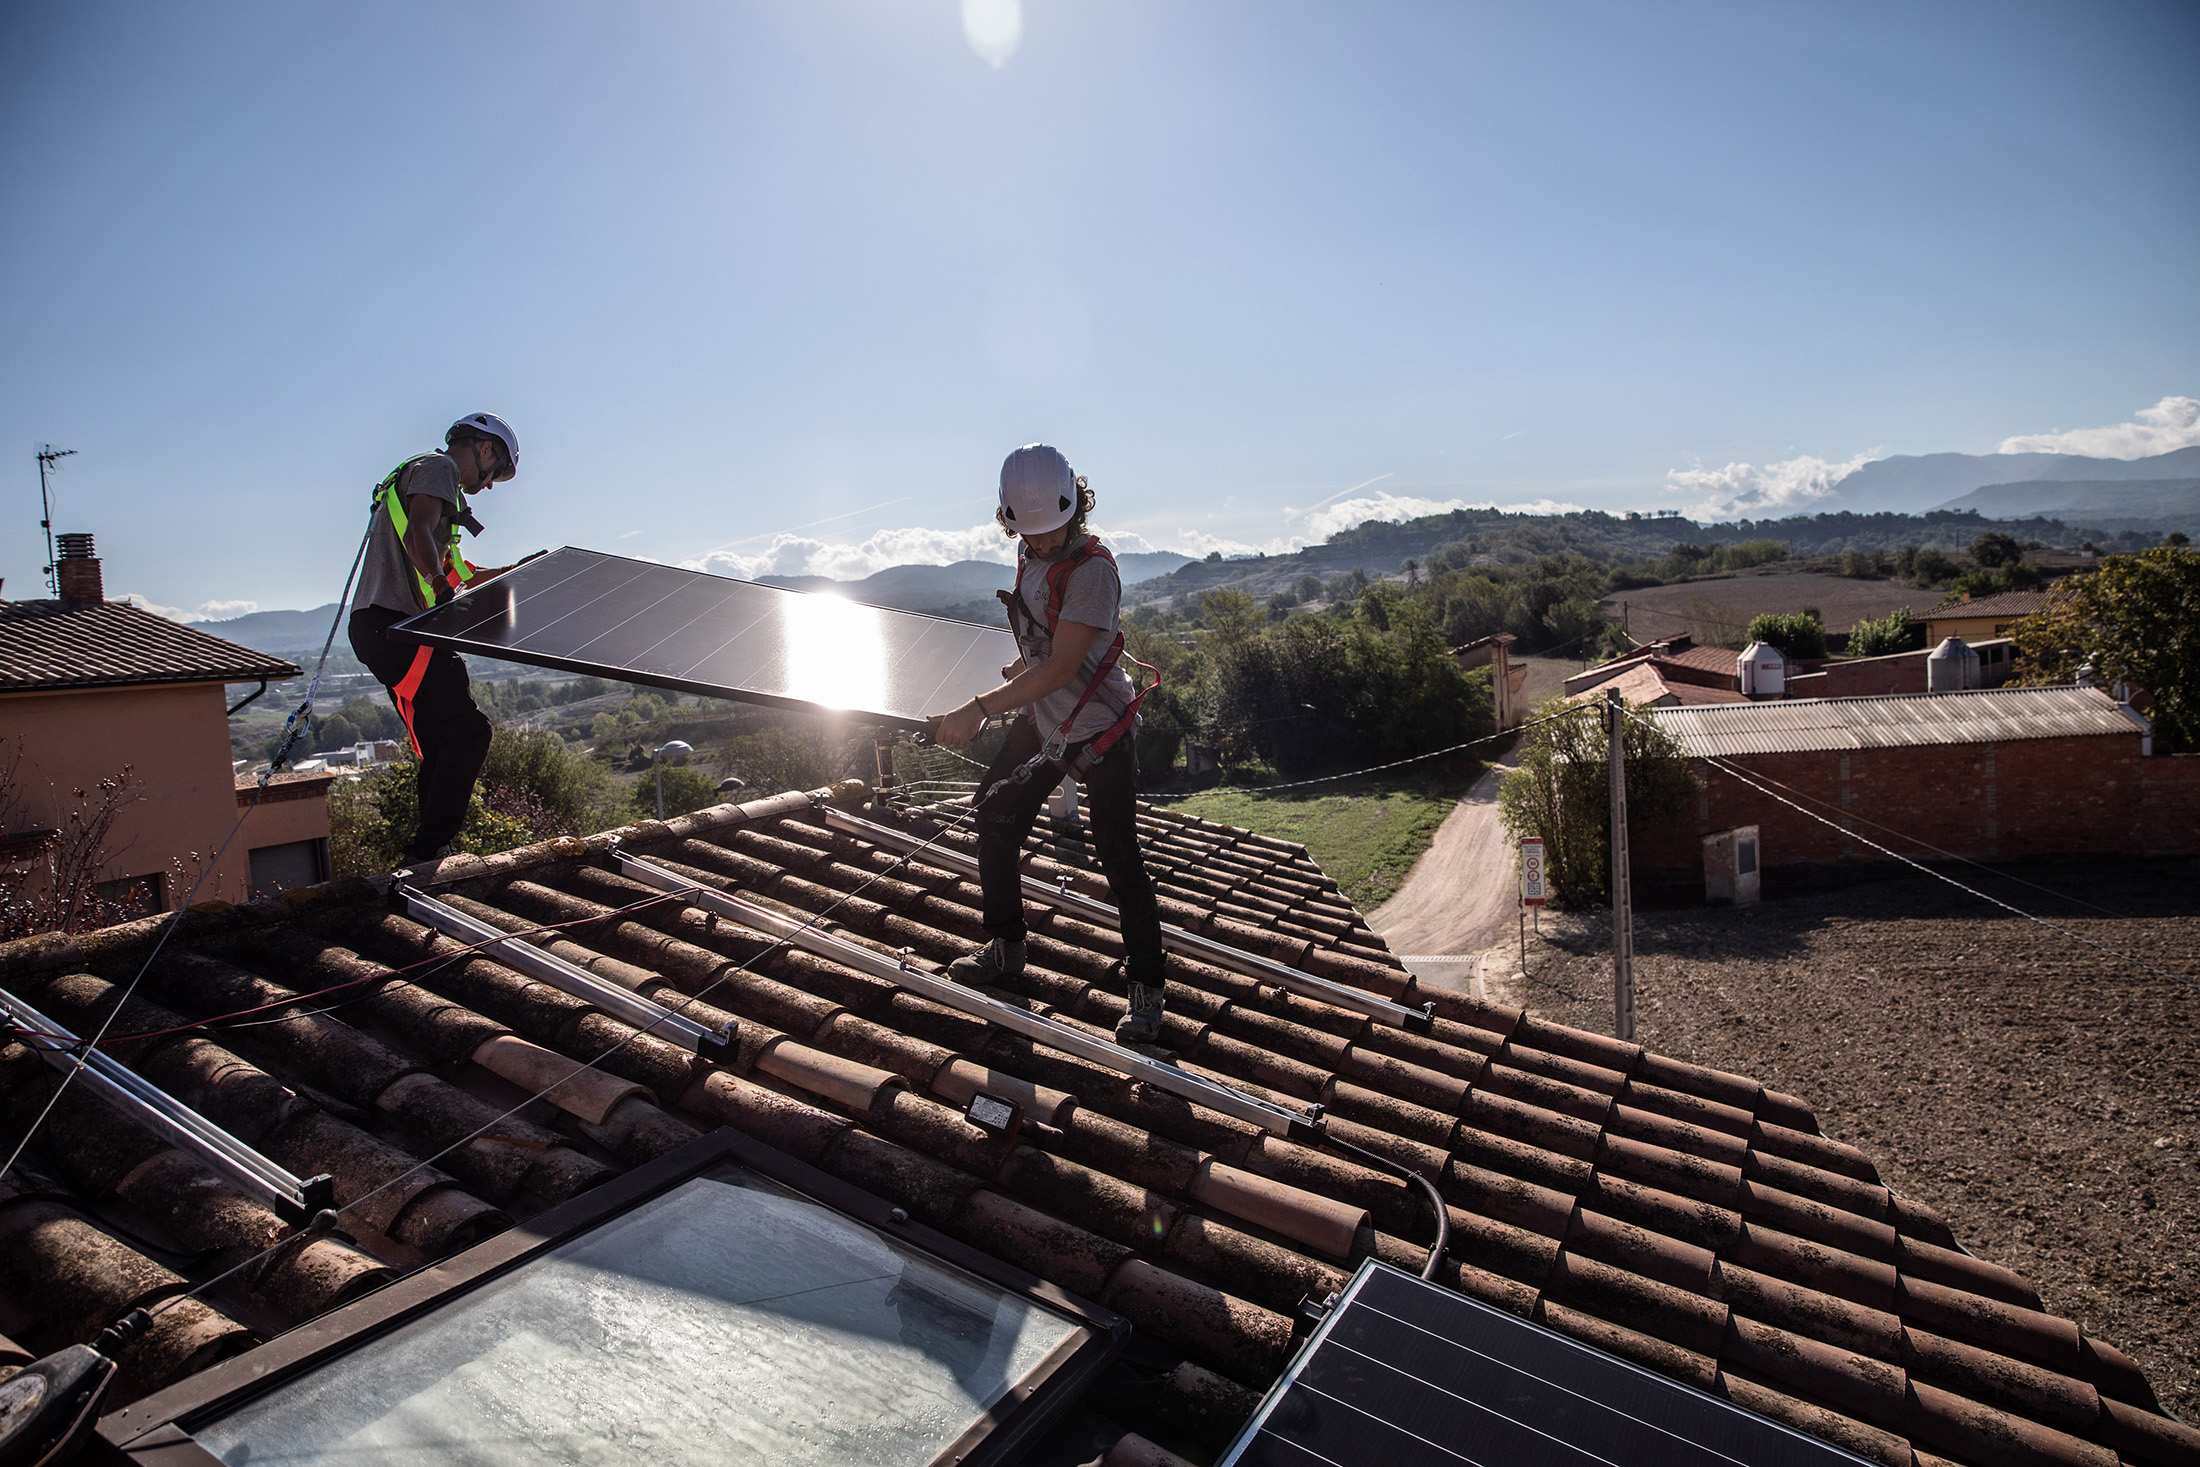 Engineers from Sud Energies Renovables SL install solar panels onto the roof of a residential property in Barcelona, Spain, on Sept. 7, 2022.